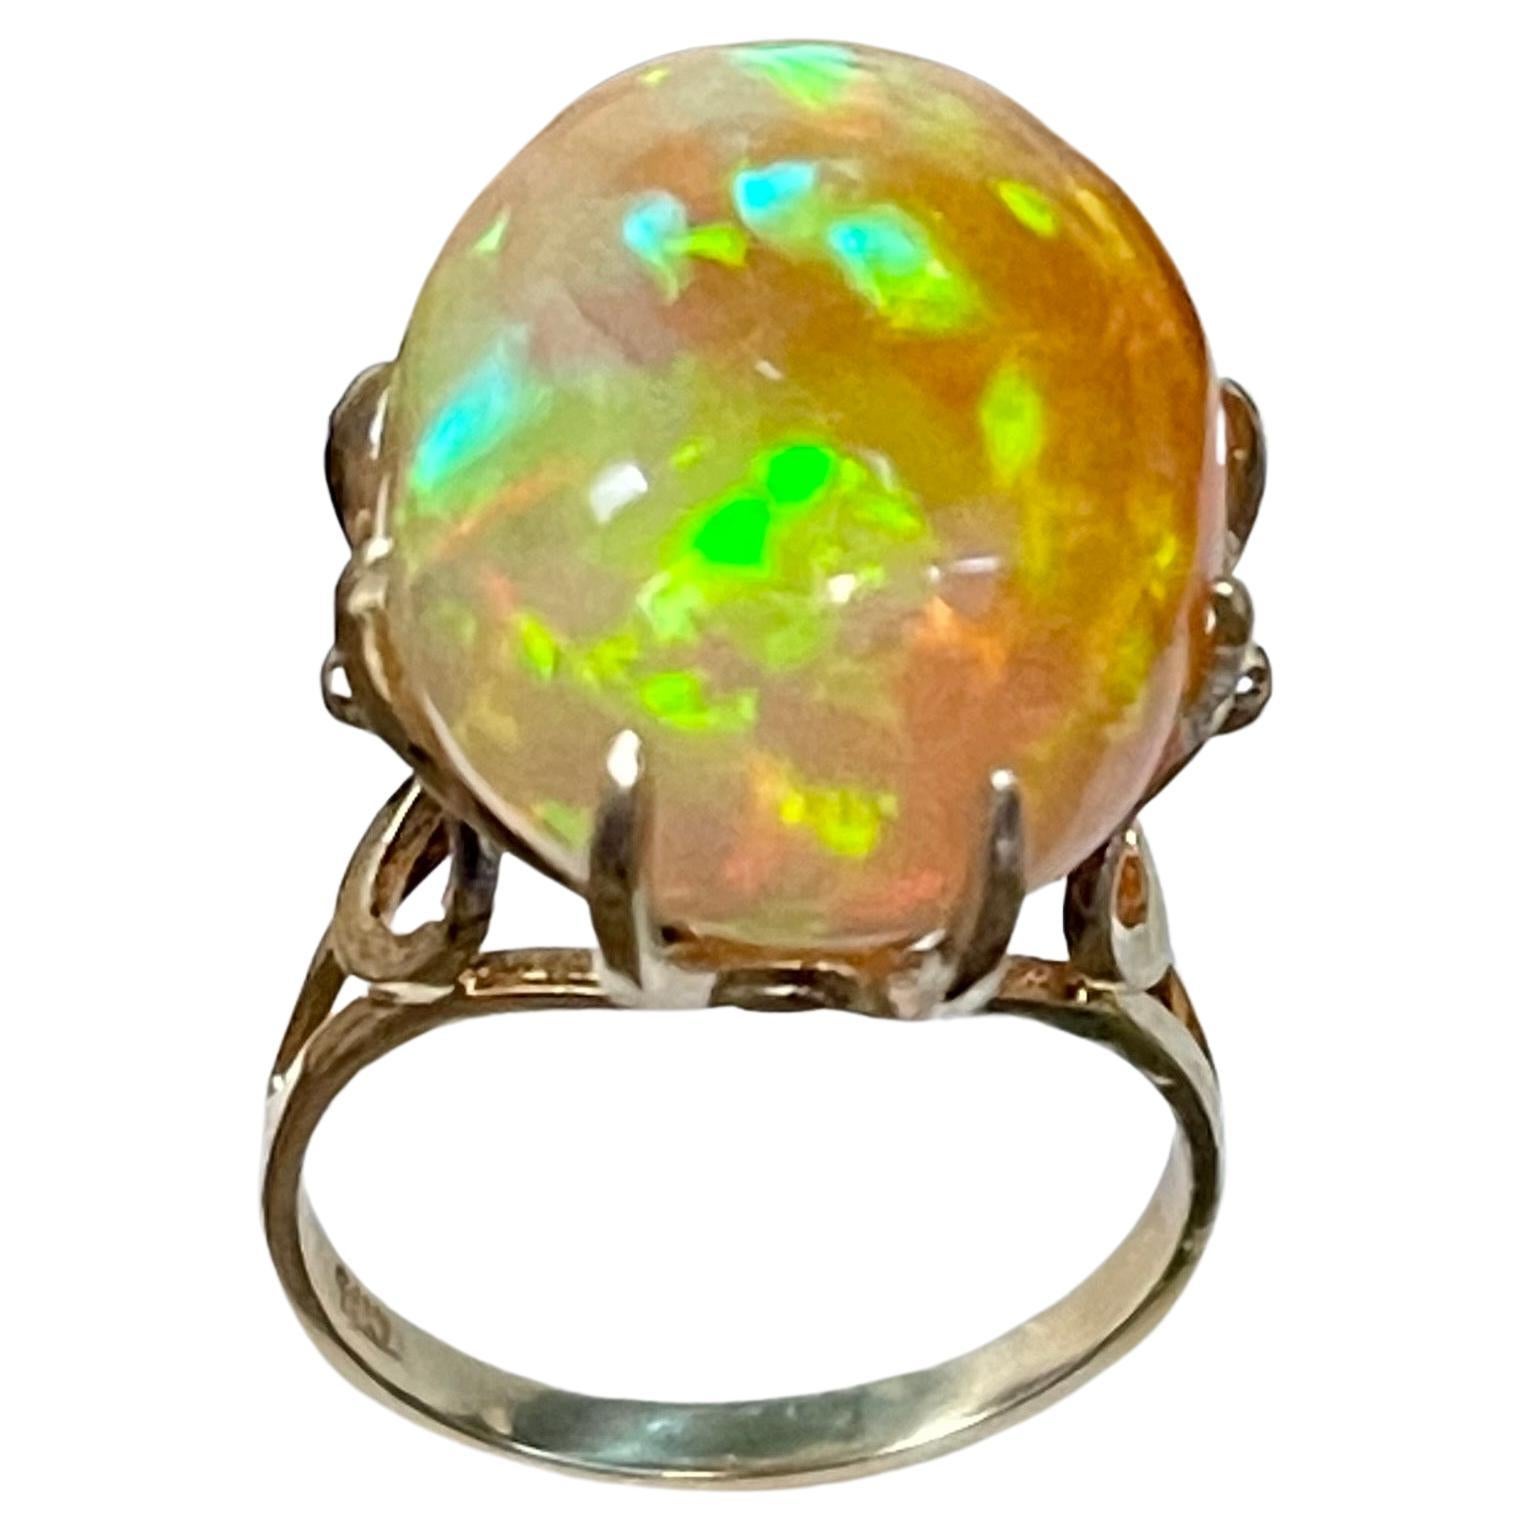 12 Carat Oval Shape Ethiopian Opal Cocktail Ring 14 Karat Yellow Gold size 6.5
Oval  Natural Opal  A classic, Cocktail ring 
14 Karat Yellow Gold Estate
Size of the opal 19 X 15 MM, Approximately 12 ct
Amazing colors in this opal and a great quality